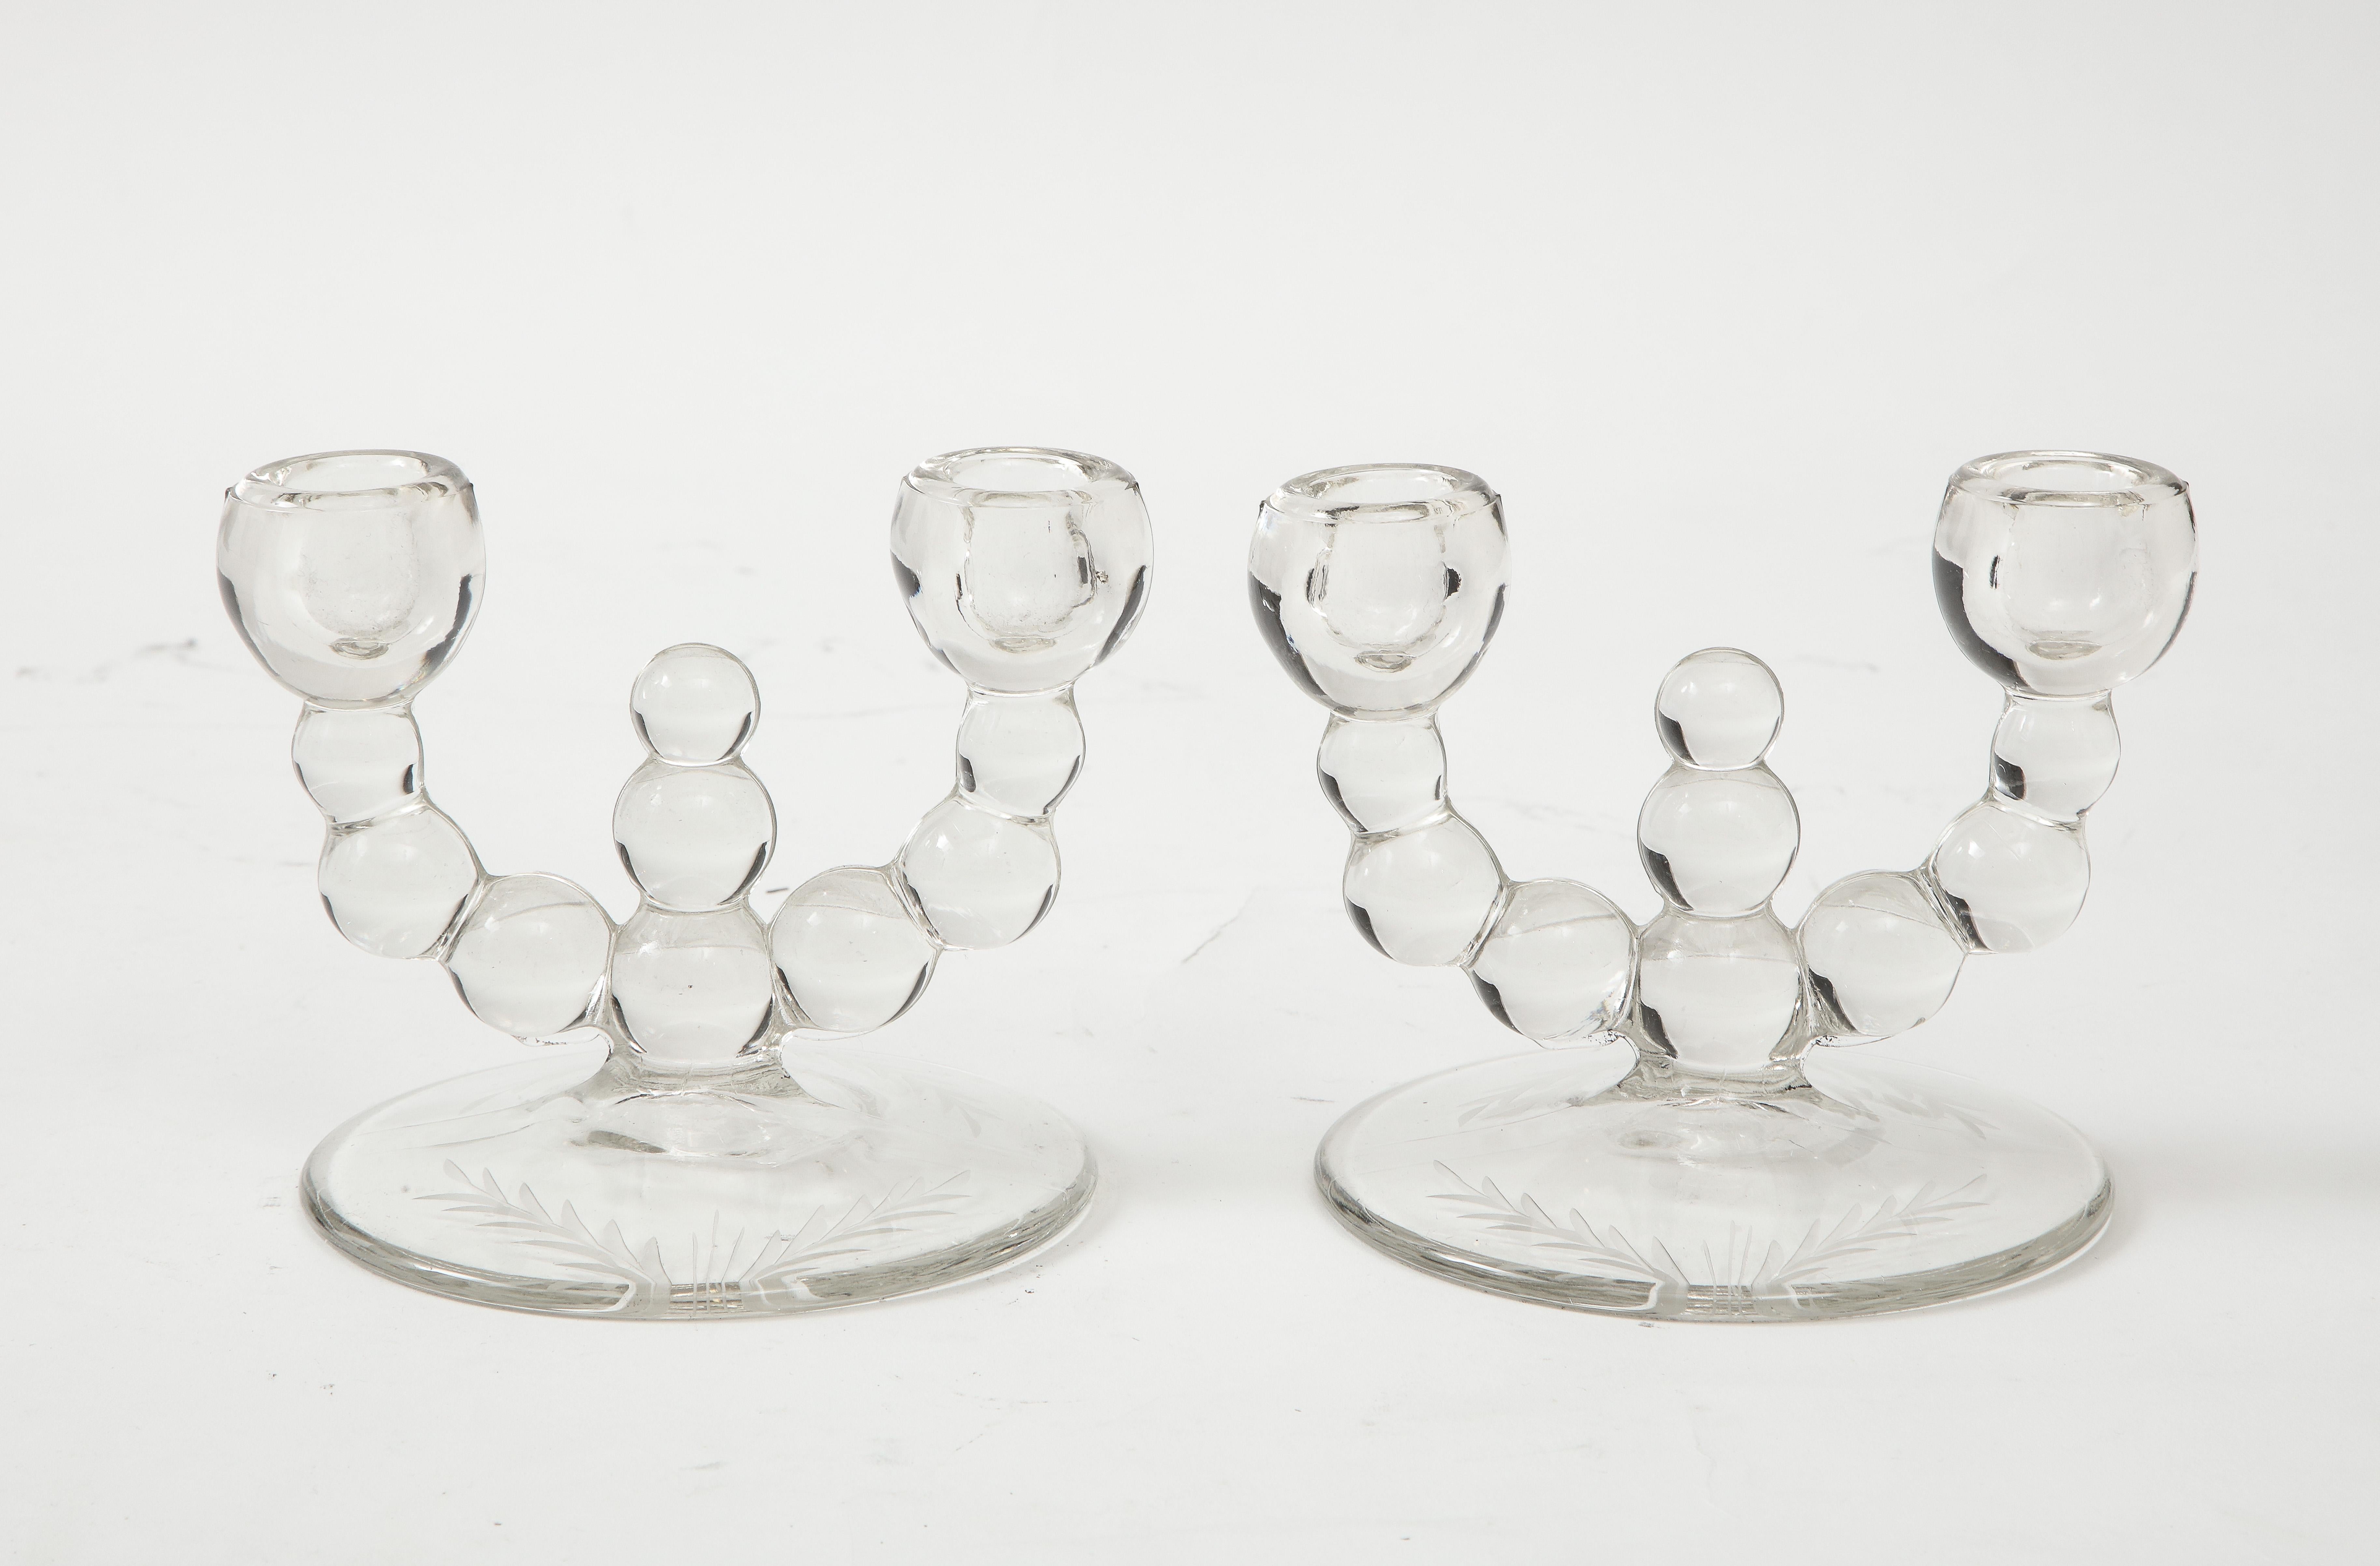 Pair of Art Deco glass candlesticks with segmented dodies and wheel etched details. Each candlestick holds 2 candles.